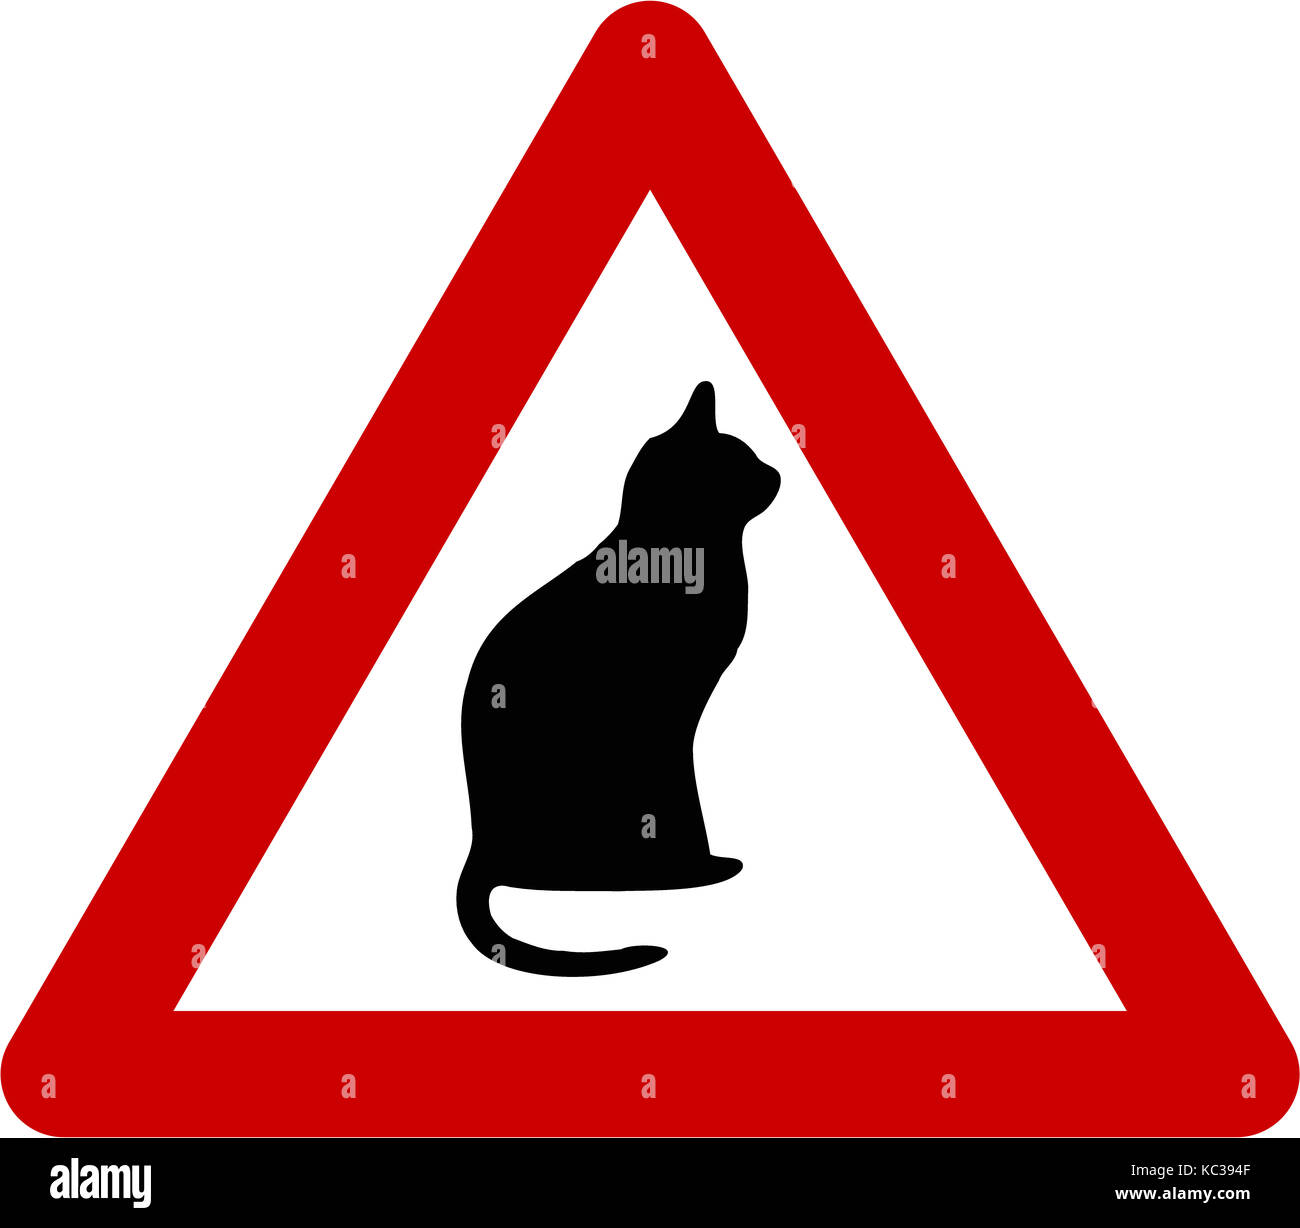 Warning sign with cat symbol Stock Photo